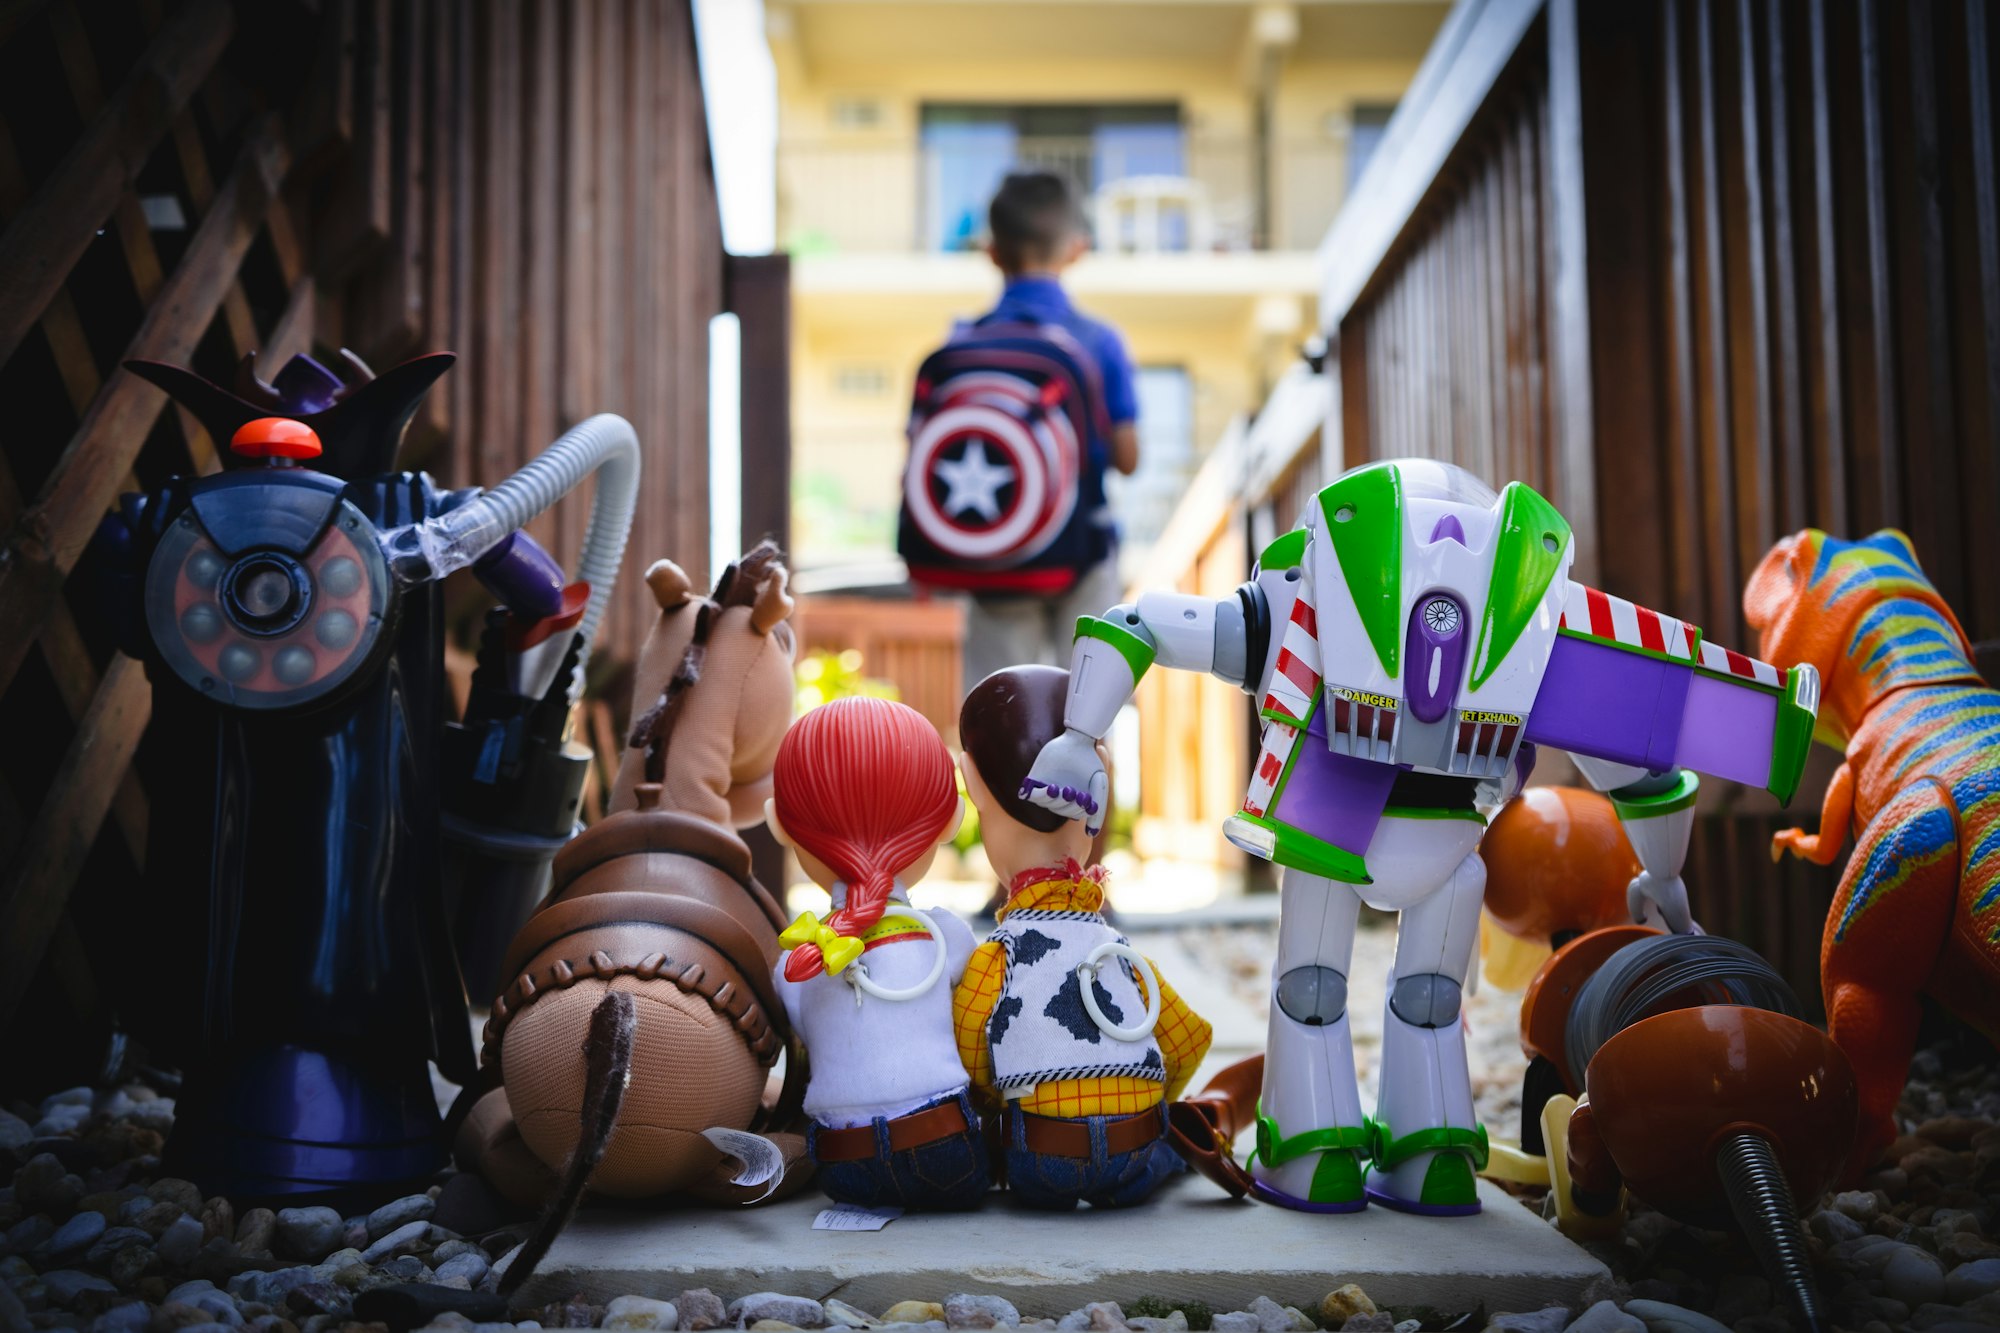 Toys from the movie Toy Story 